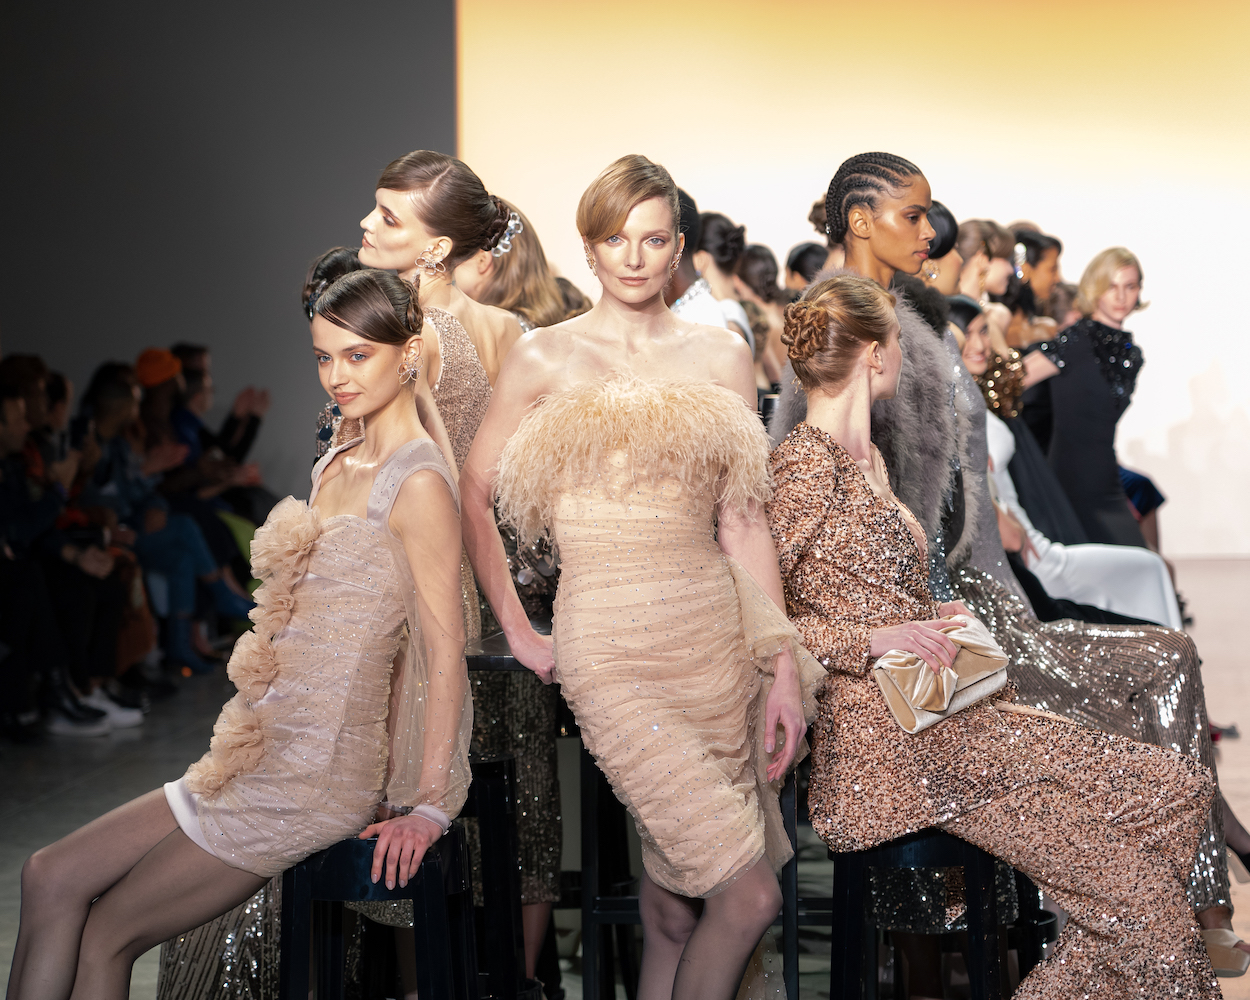 The end of the Badgley Mischka show, when all the models came out on the runway to pose around a group of chairs.